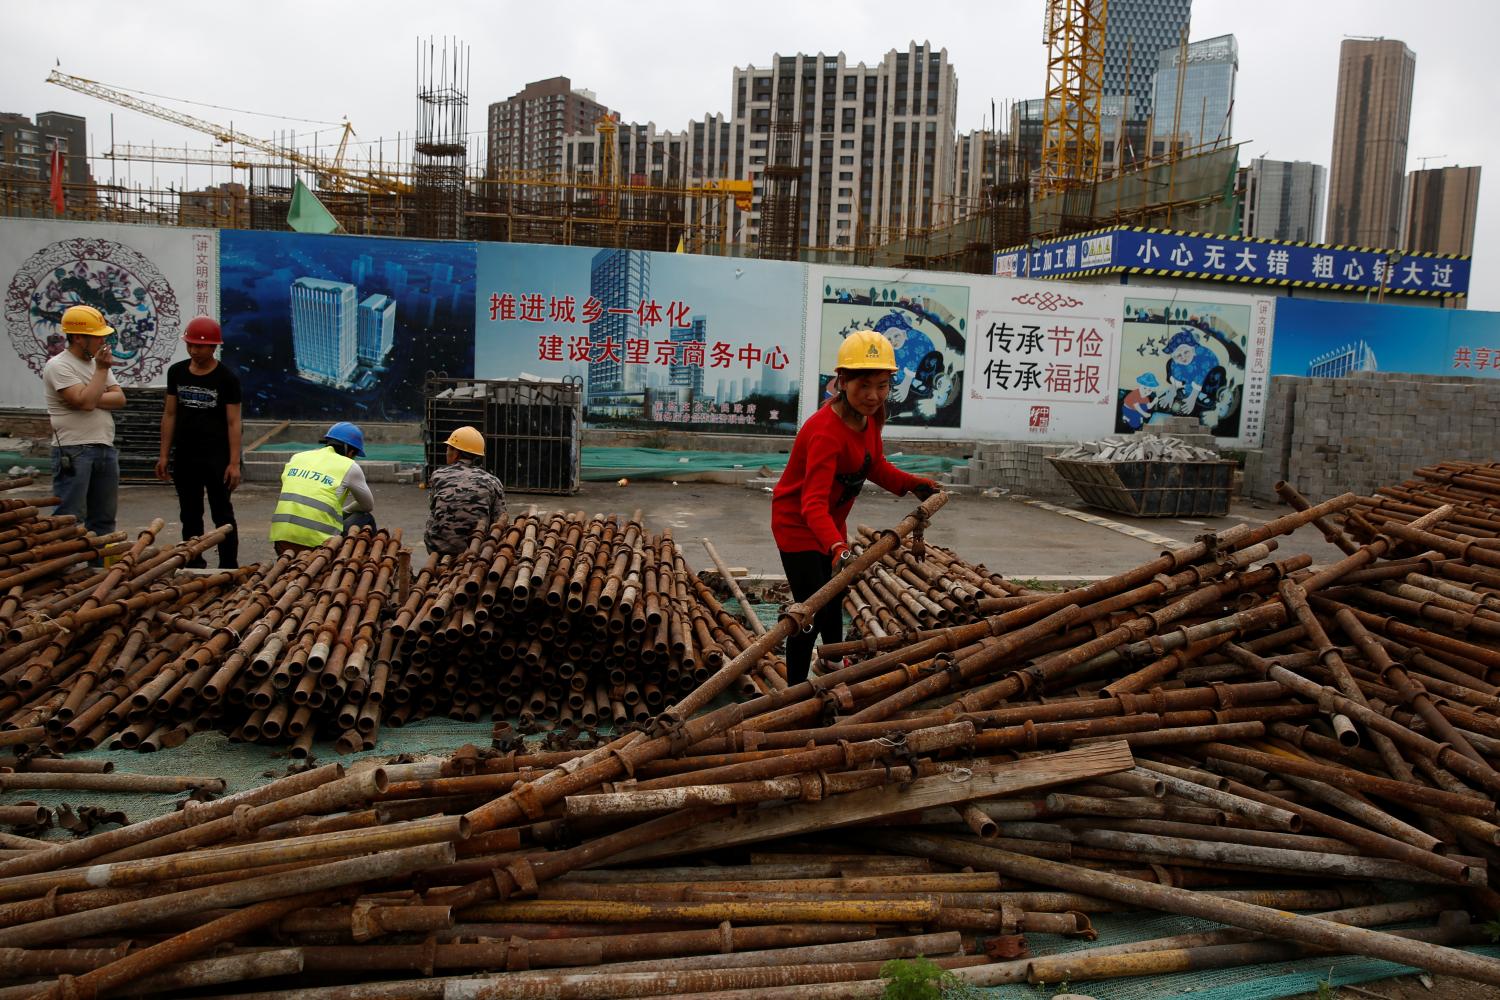 A woman sorts scaffolding poles at a construction site near recently erected office and residential high-rises in Beijing, China April 20, 2017. REUTERS/Thomas Peter - RTS1342V